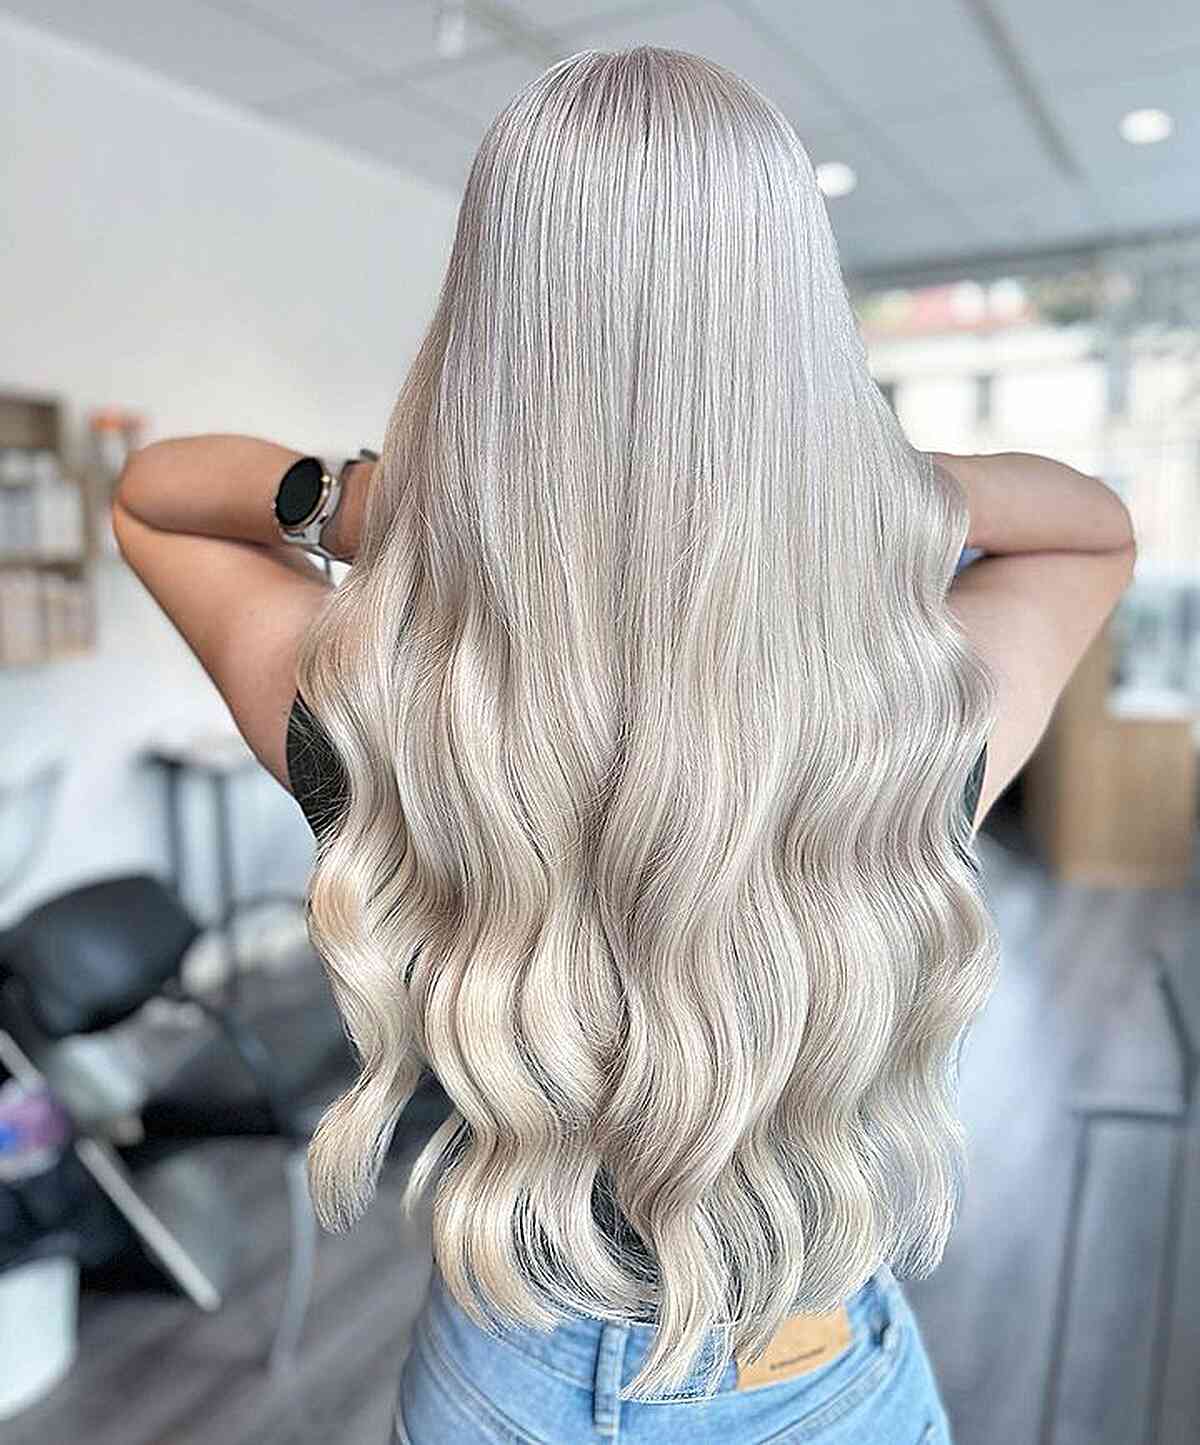 Long White Blonde Straight Hairstyle